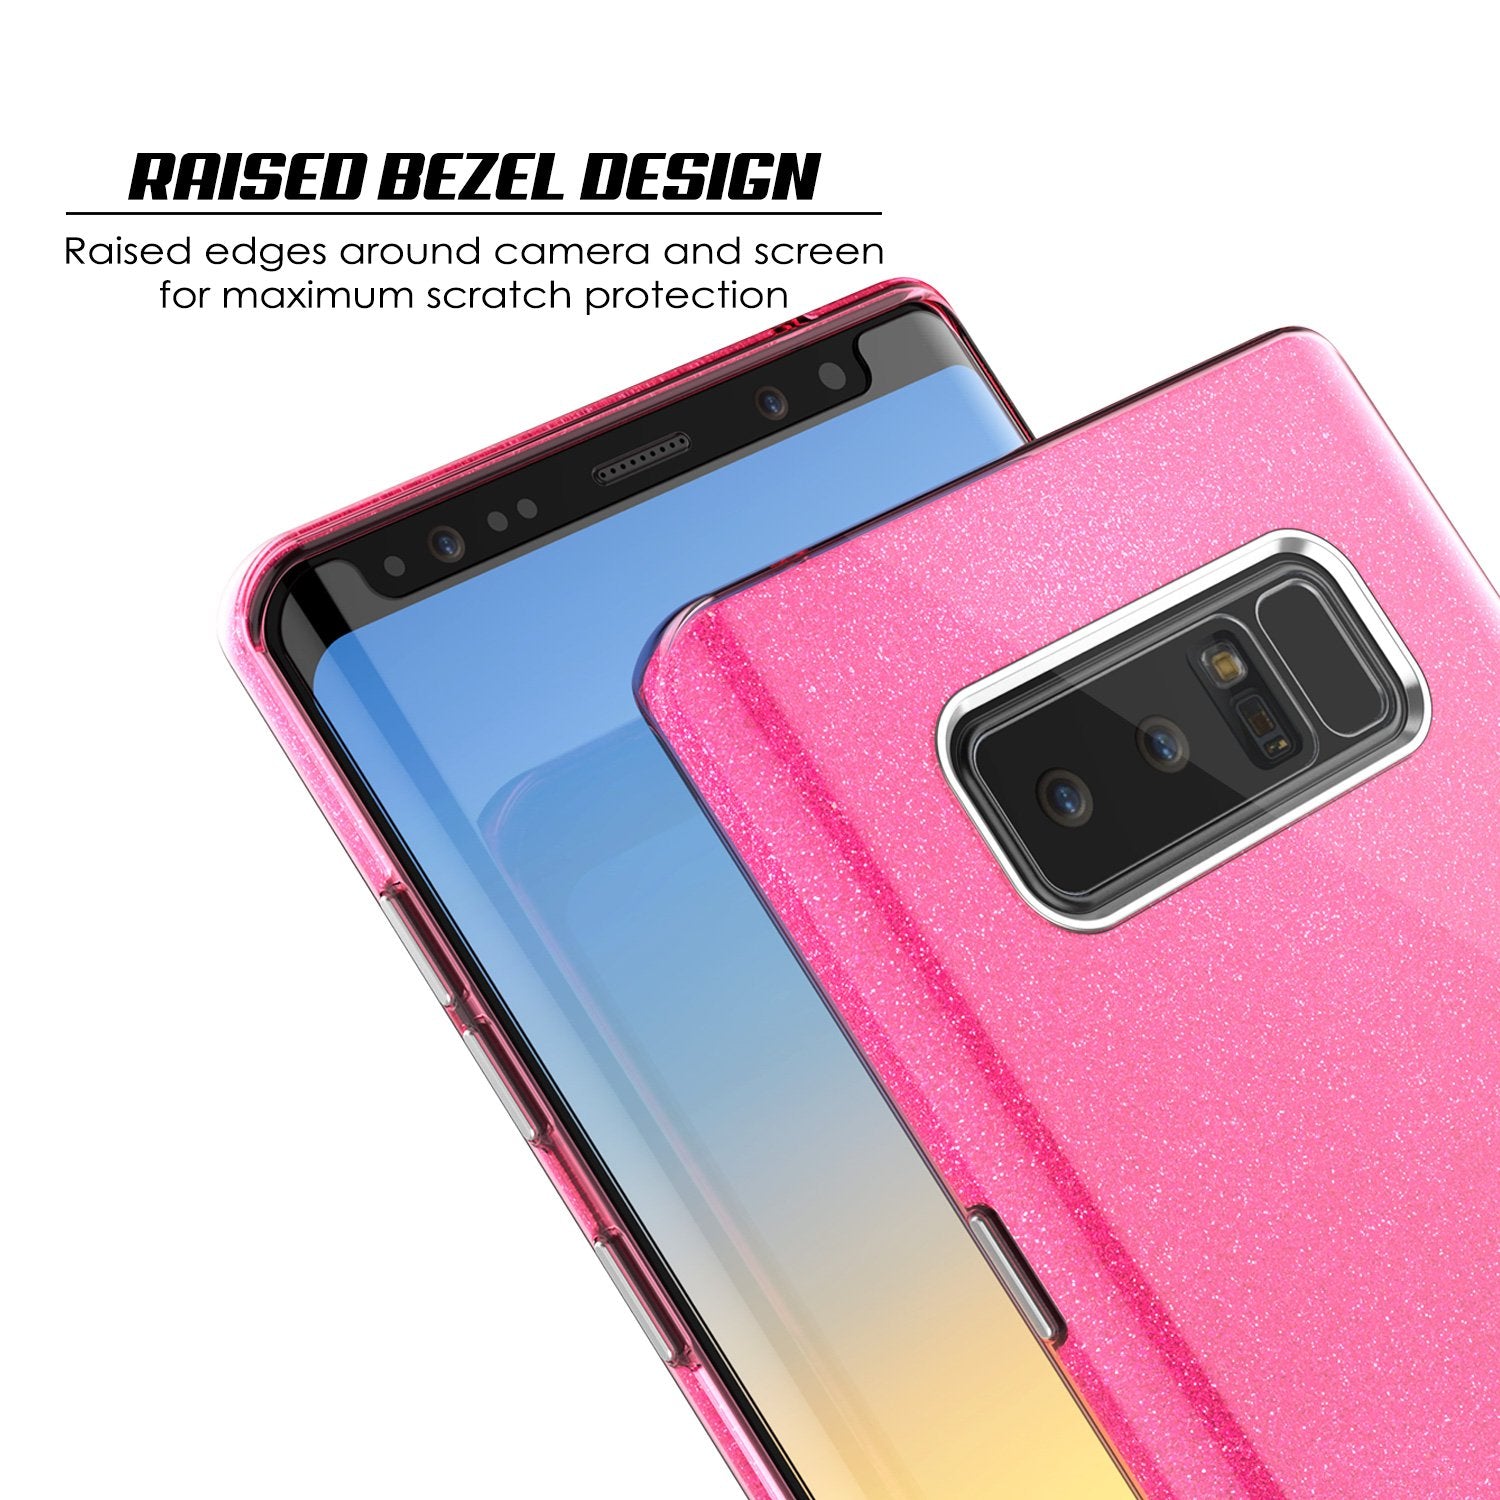 Galaxy Note 8 Case, Punkcase Galactic 2.0 Series Ultra Slim [Pink]